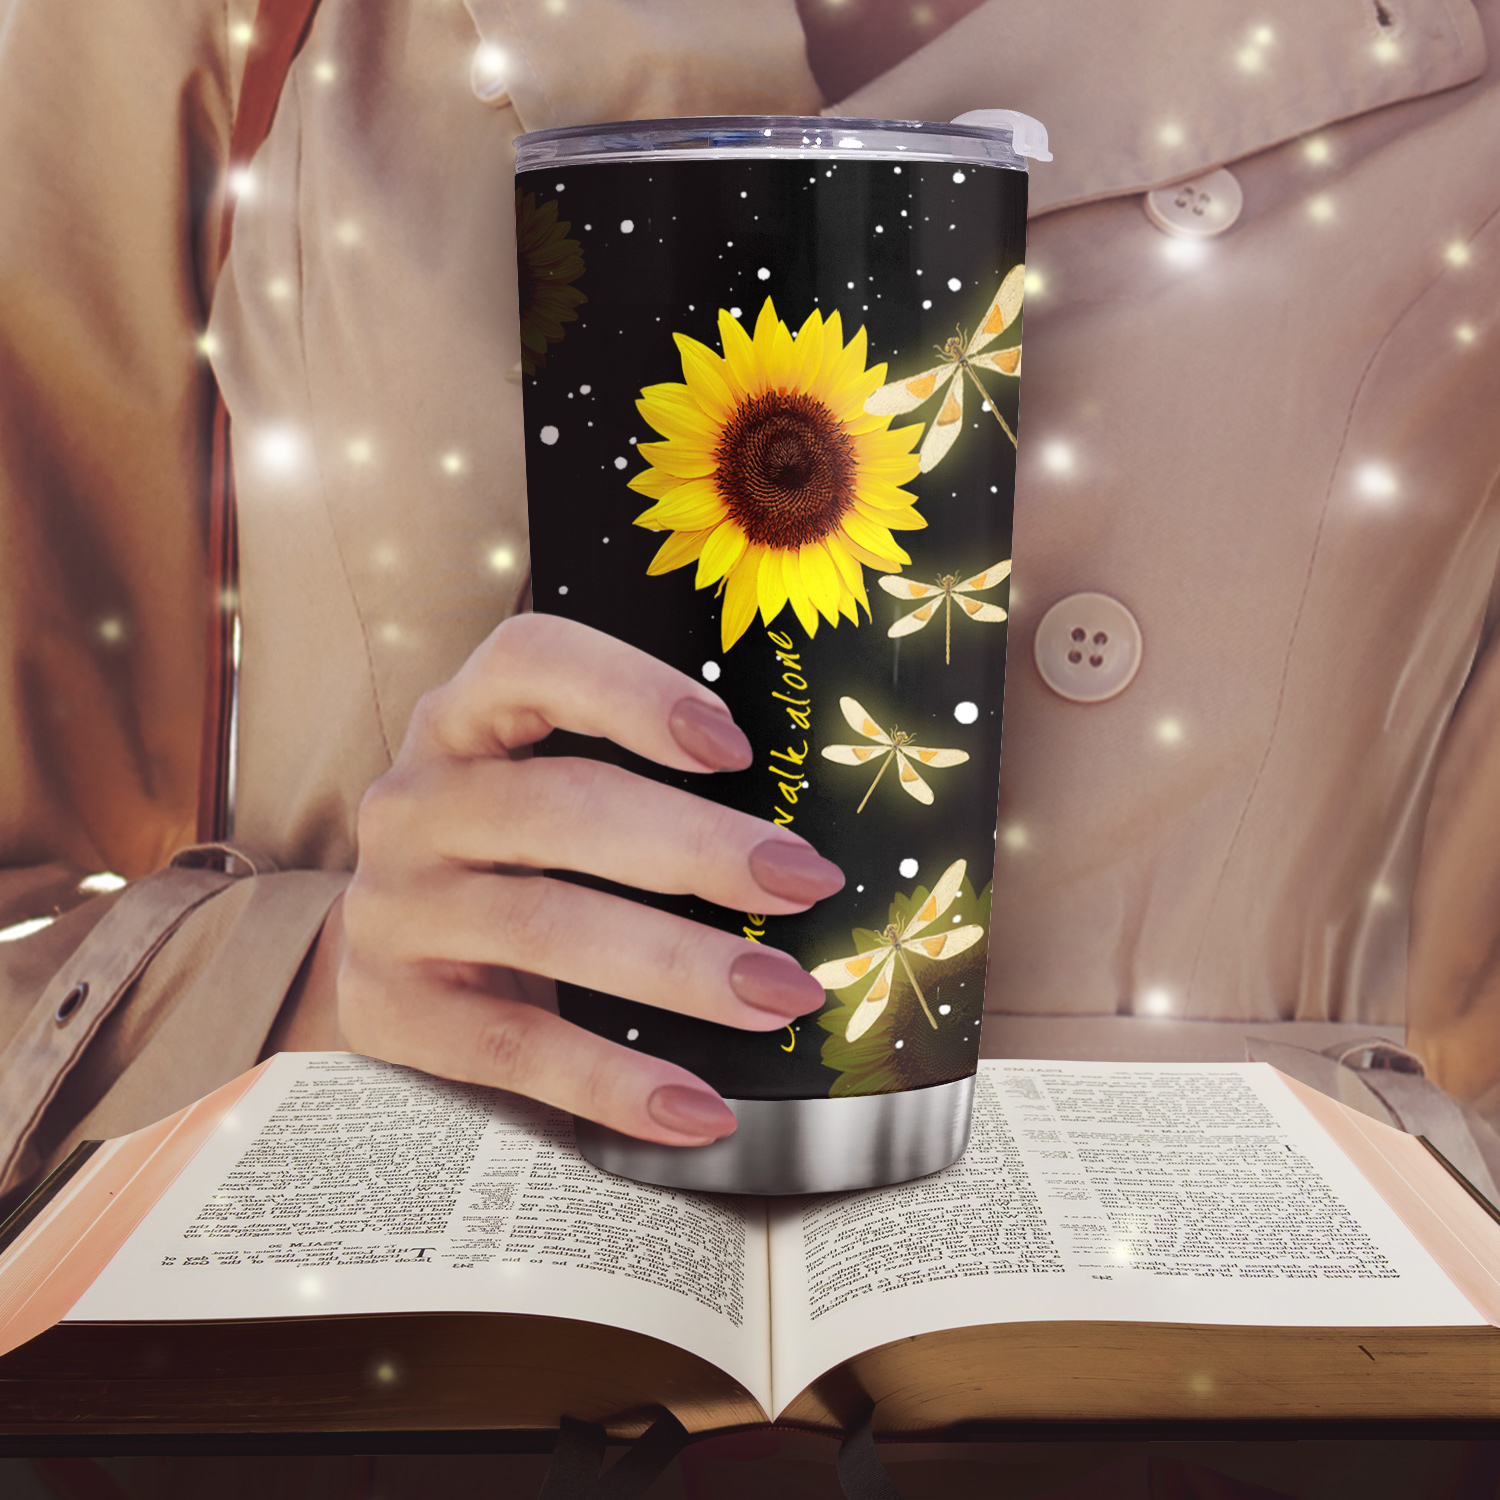 Sunflower Tumbler with Lid and Straw, Travel Coffee Mug Stainless Steel  Tumblers, Double Wall Vacuum Insulated Tumbler Cups for Women Birthday Gifts